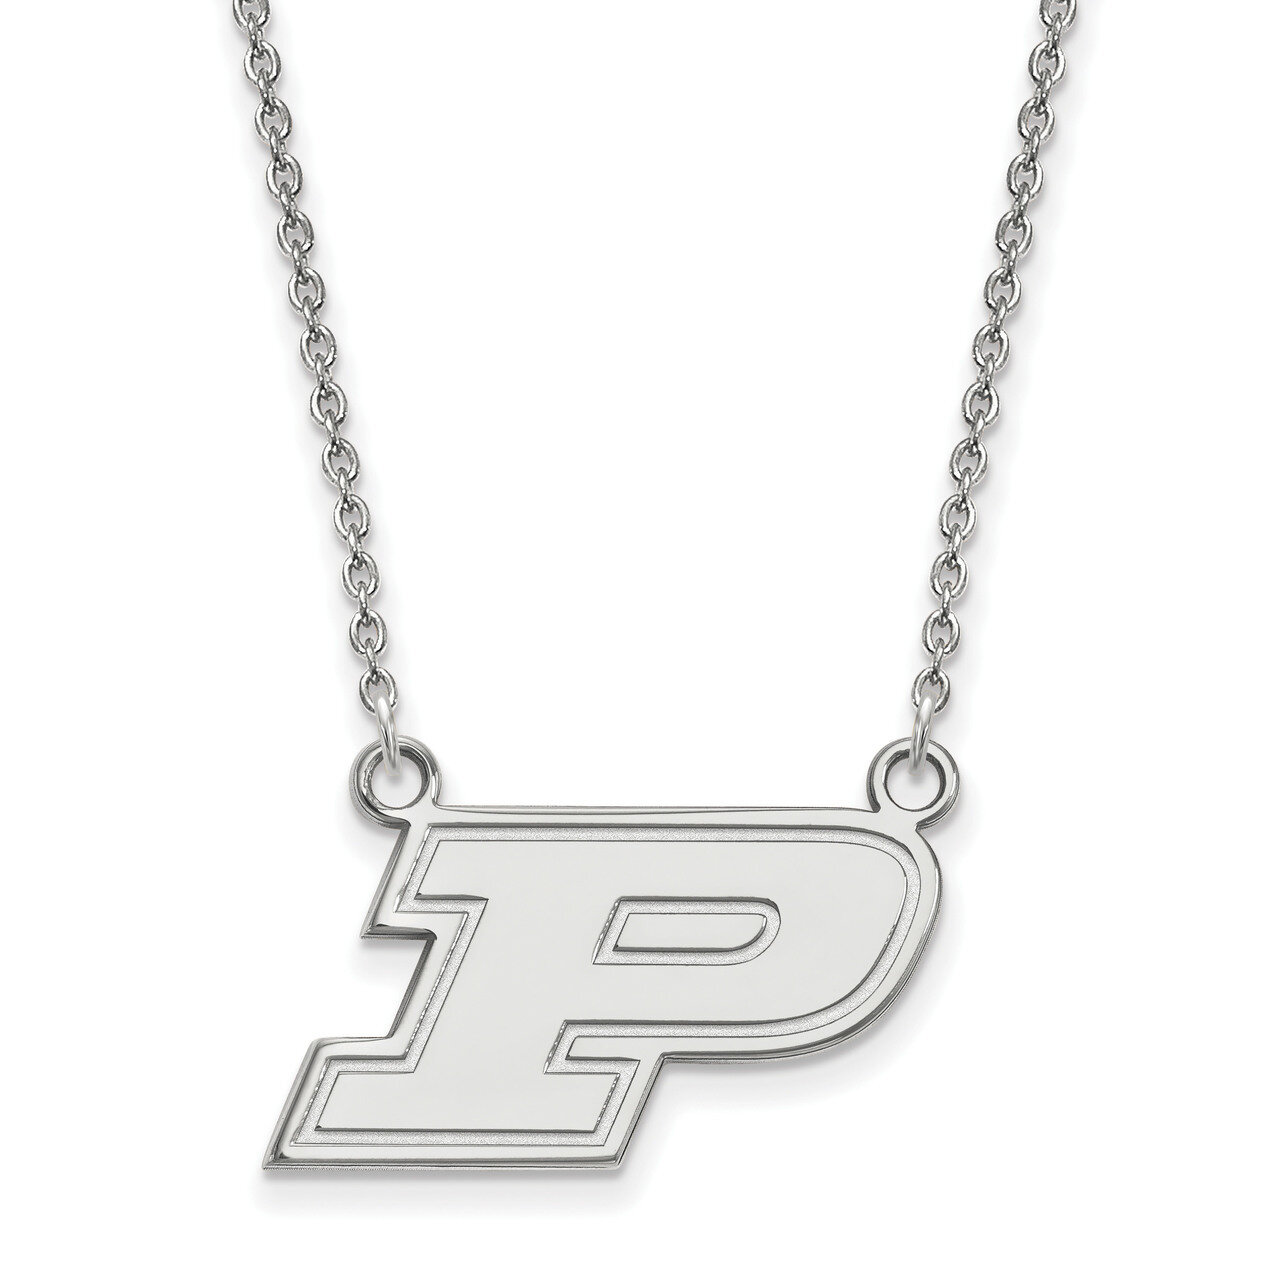 Purdue Small Pendant with Necklace 14k White Gold 4W014PU-18